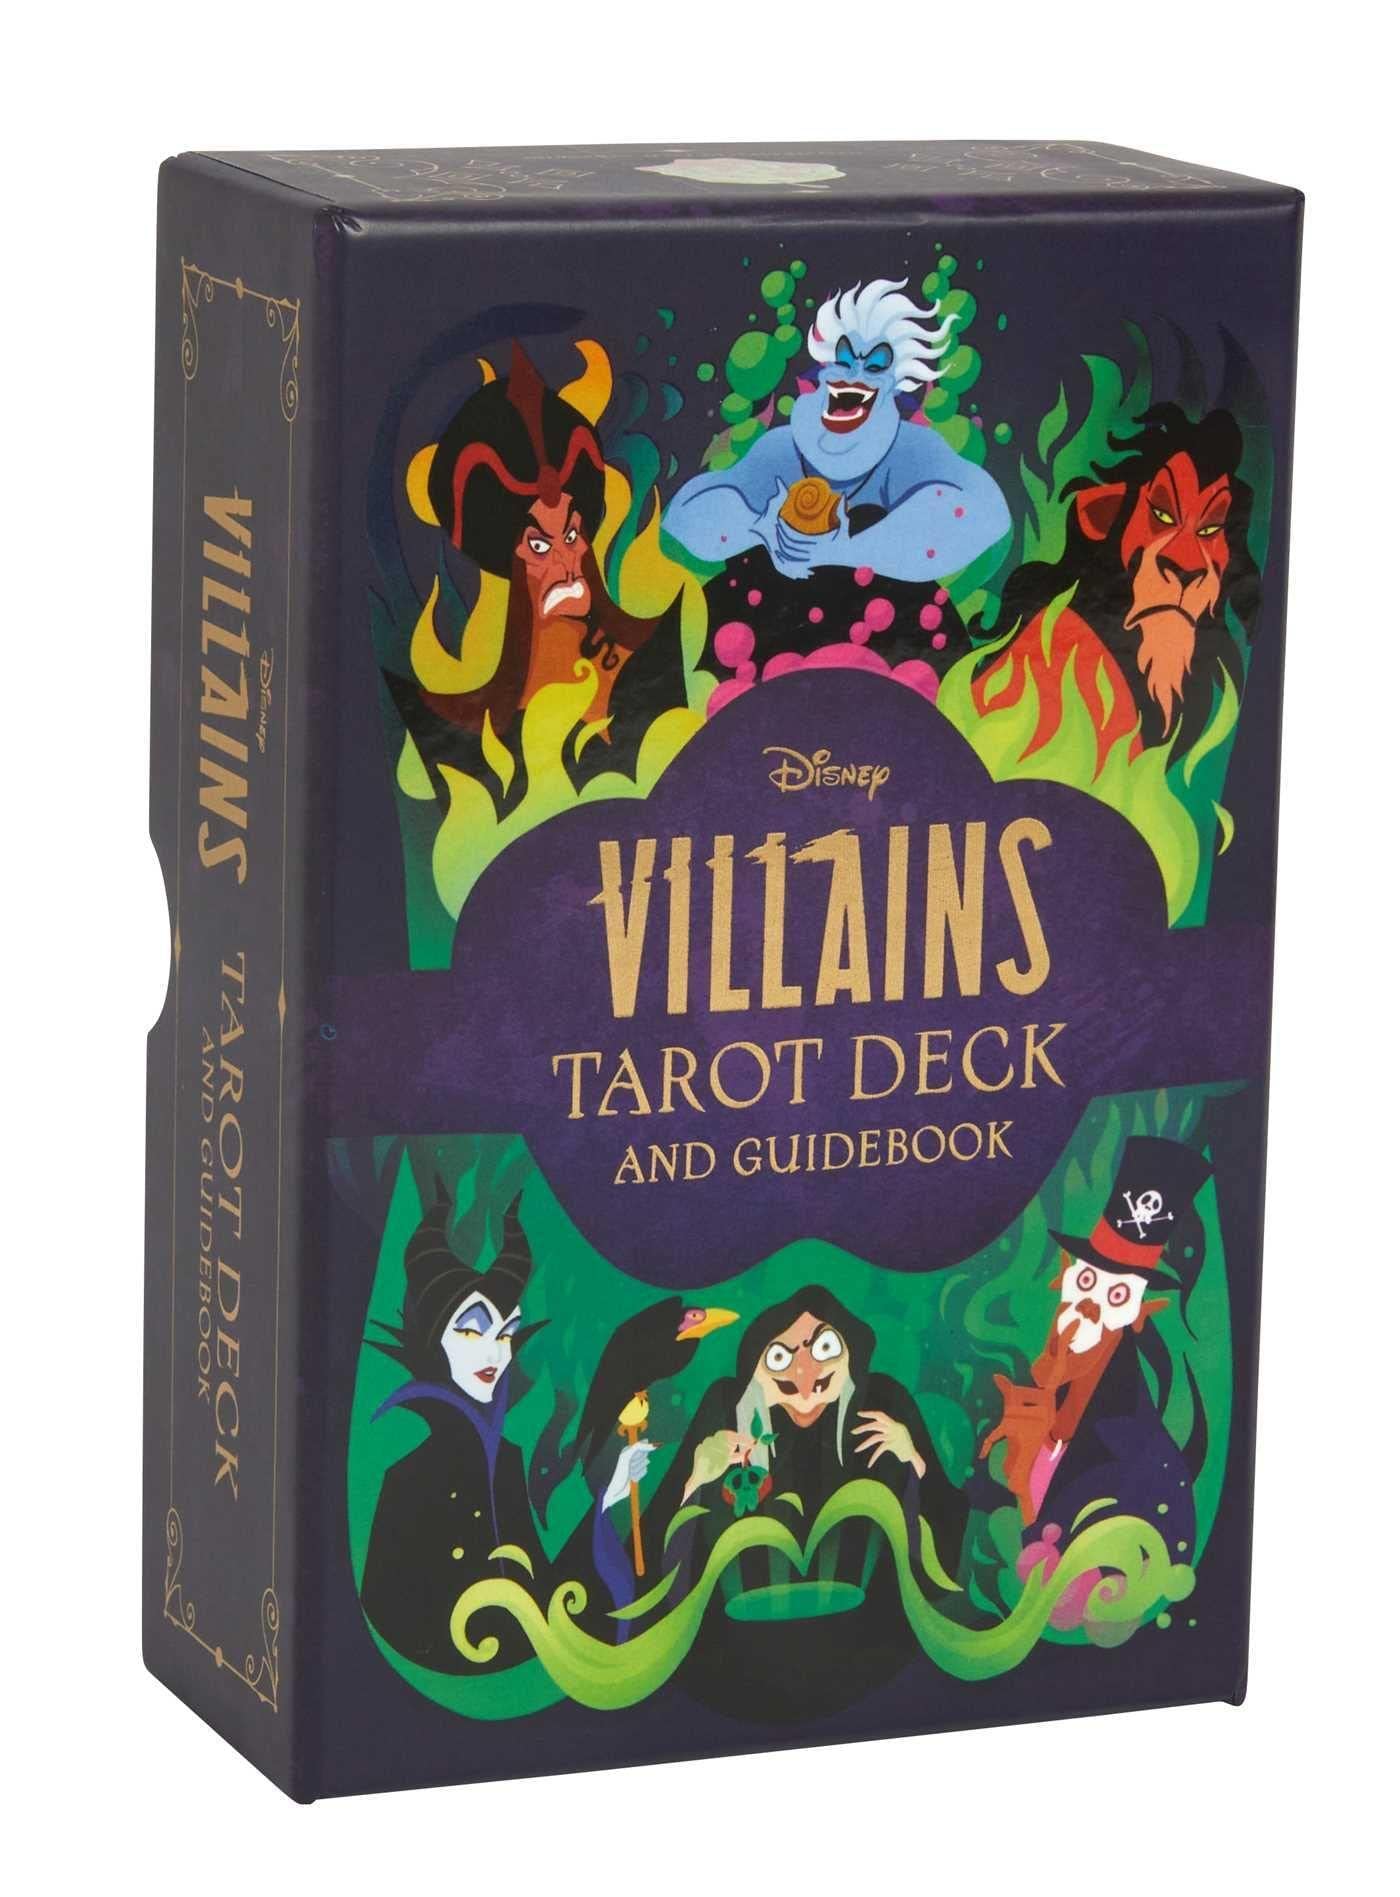 Disney Villains Tarot Deck and Guidebook by Insight Editions